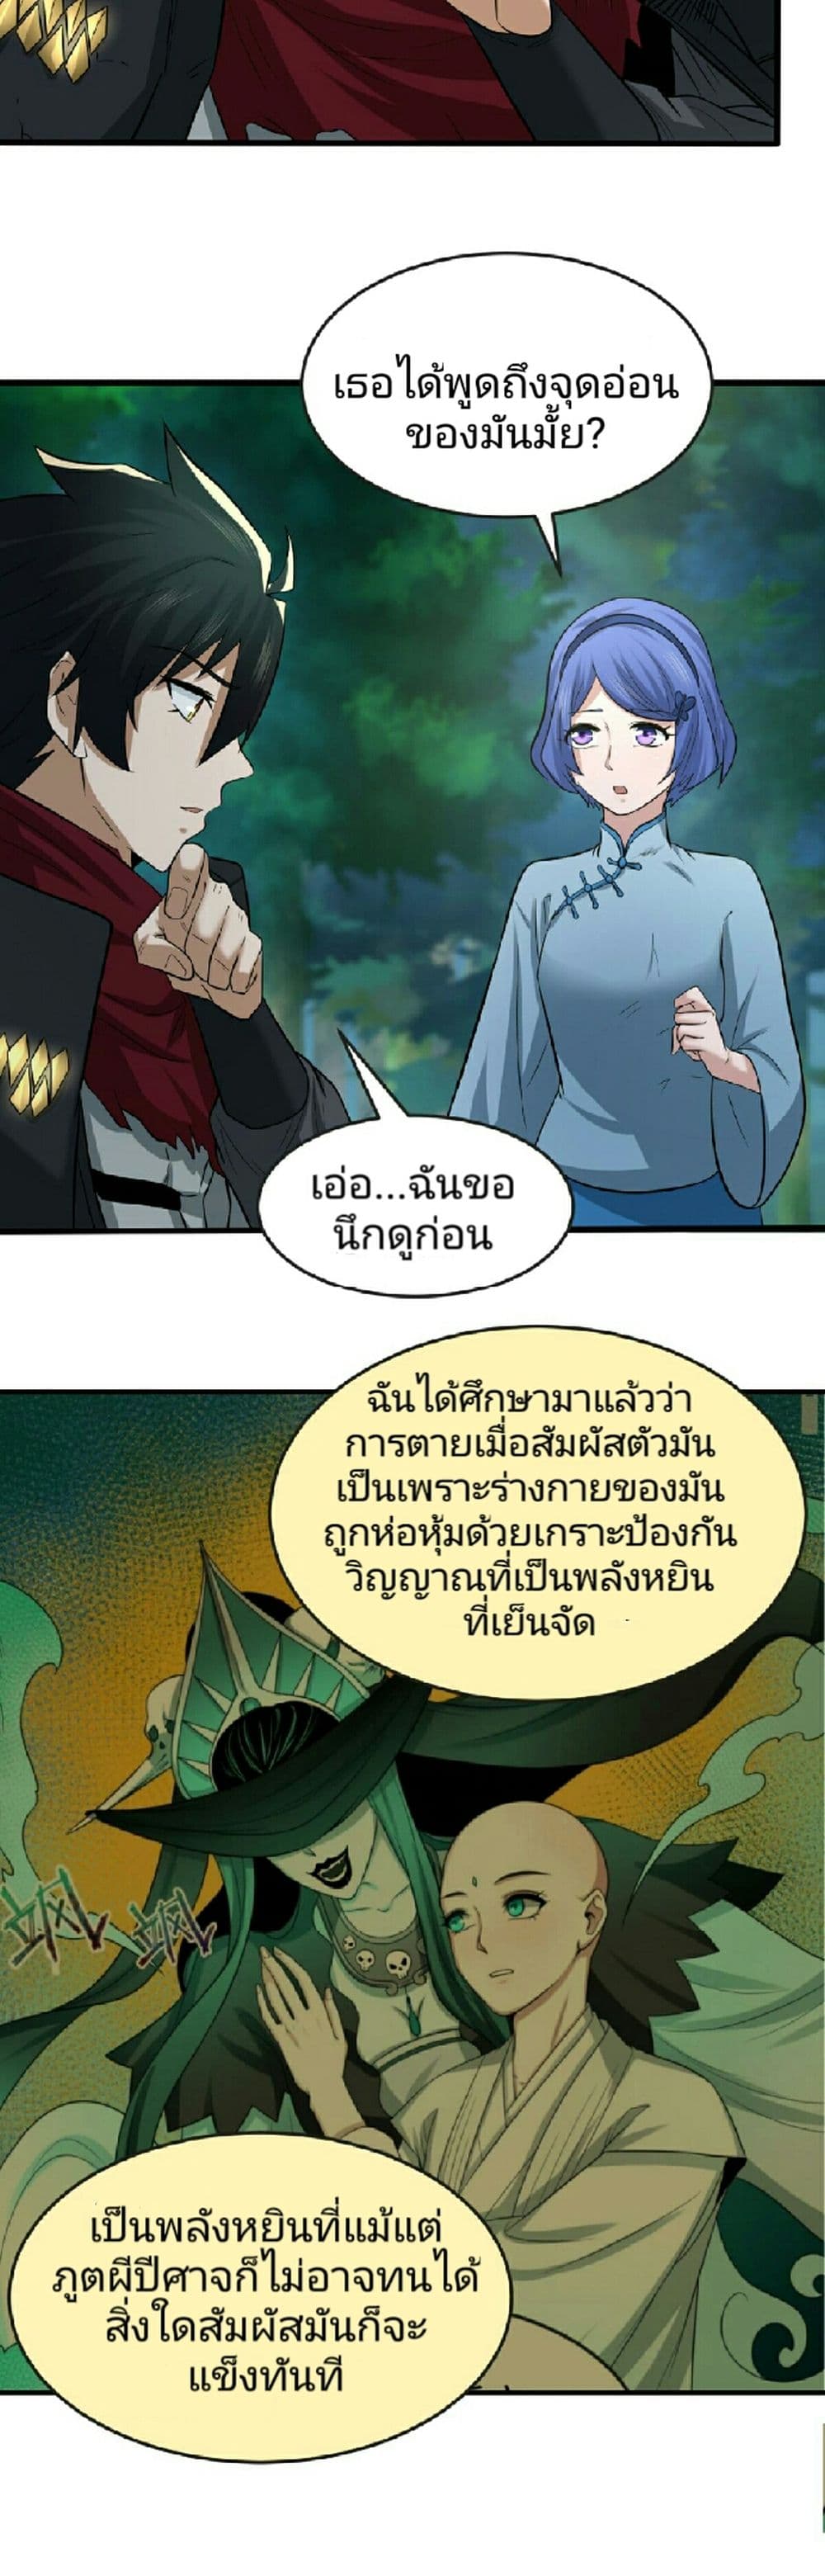 The Age of Ghost Spirits à¸à¸­à¸à¸à¸µà¹ 50 (29)